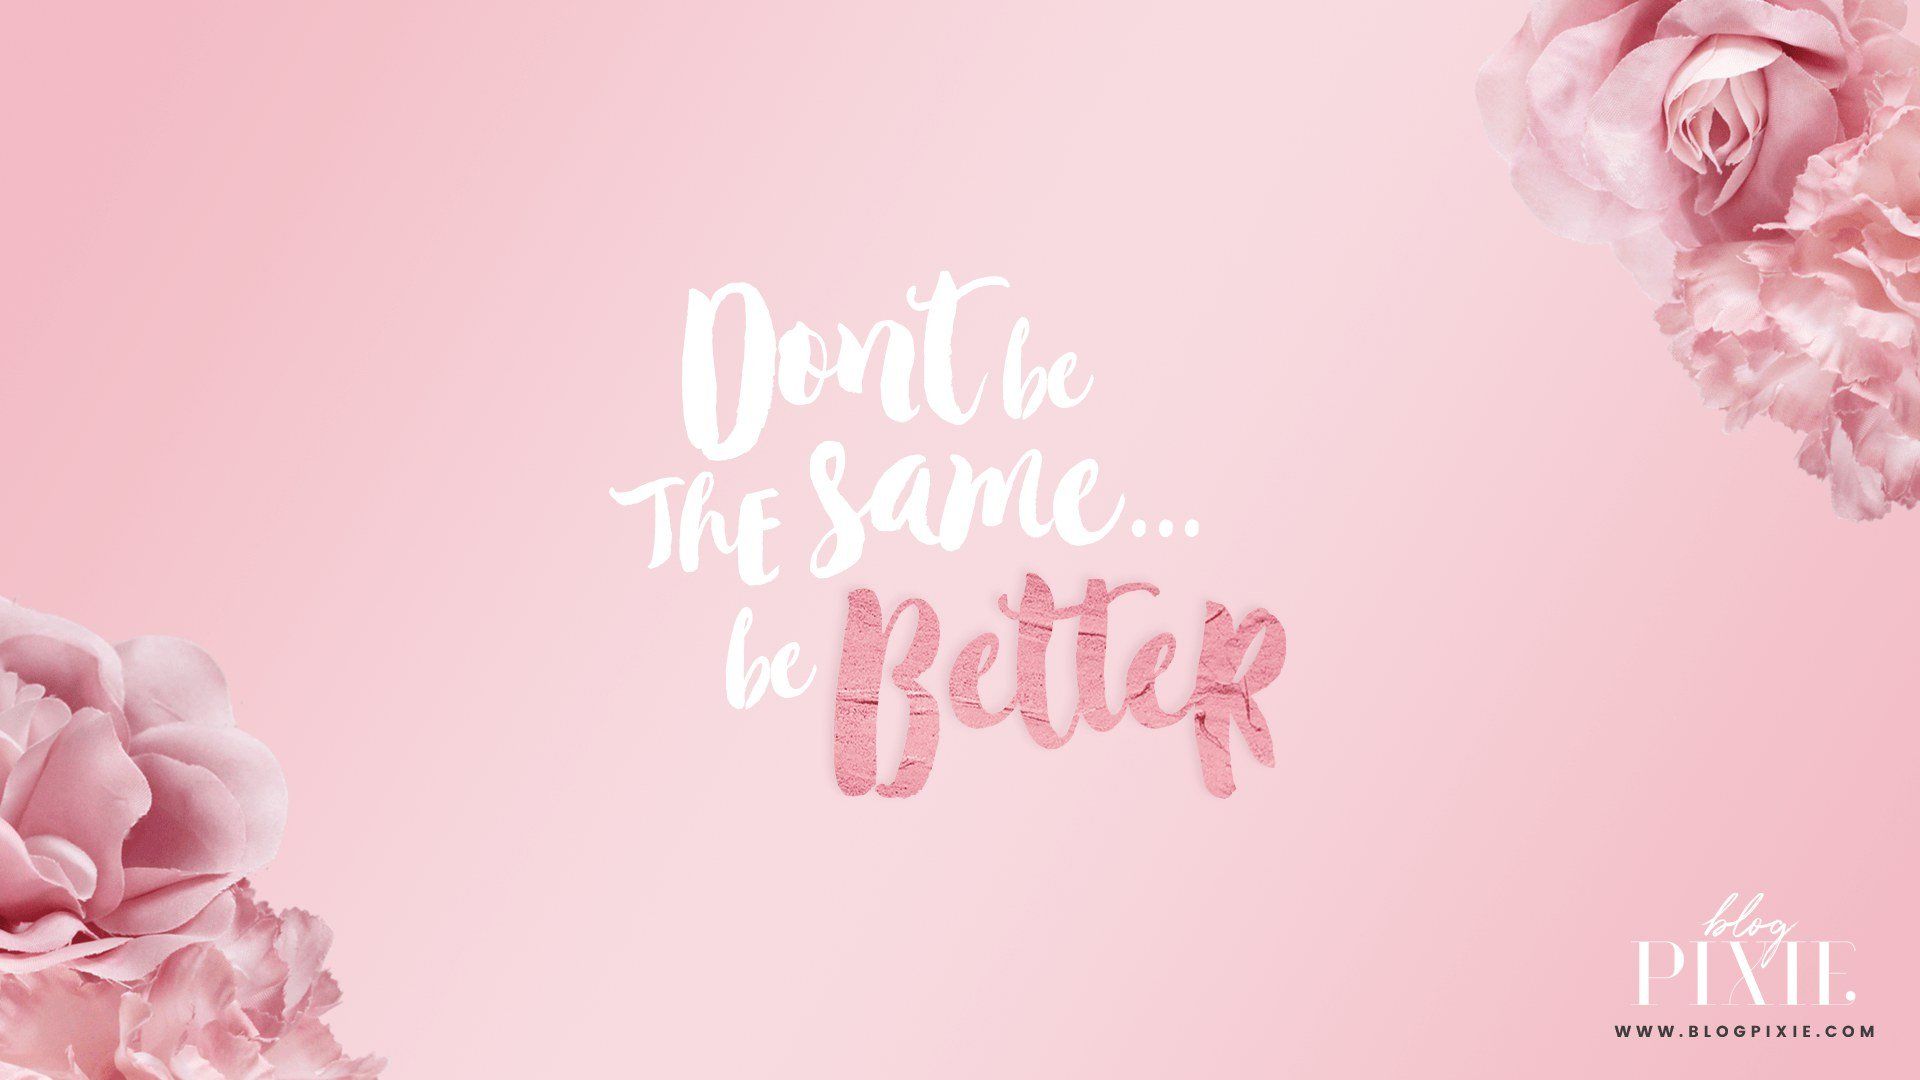 A pink background with a quote that says 